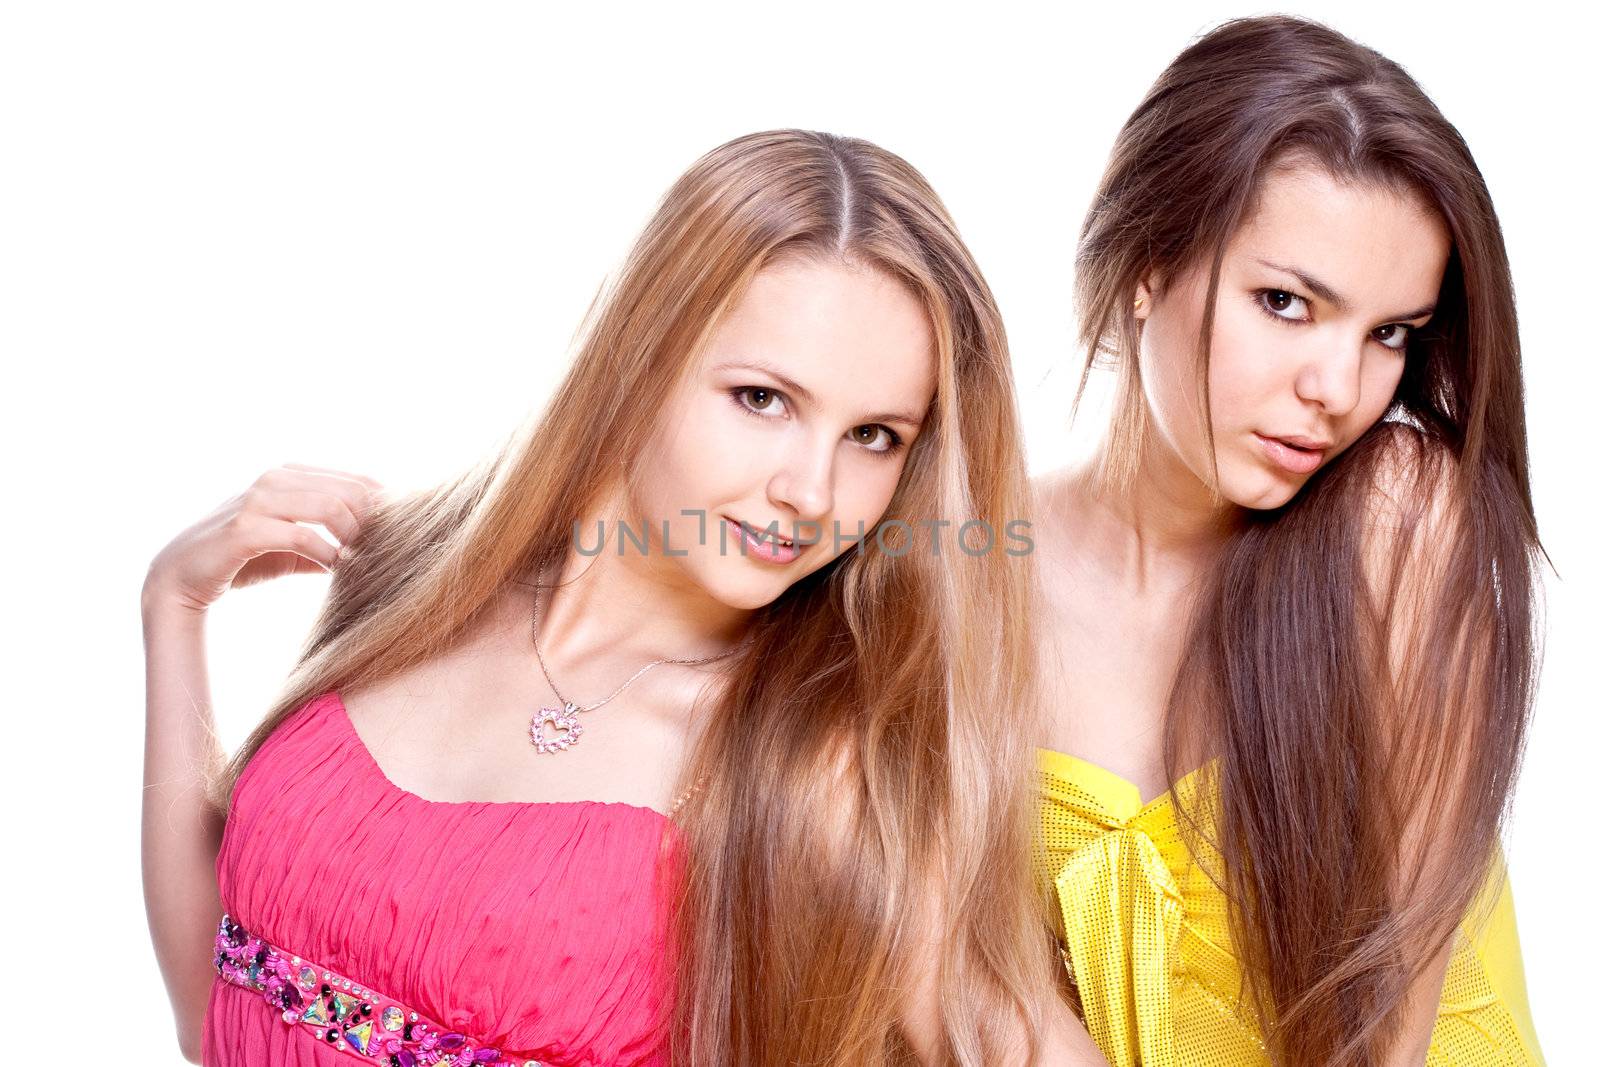 two beautiful women in a colored dress on a white background isolated